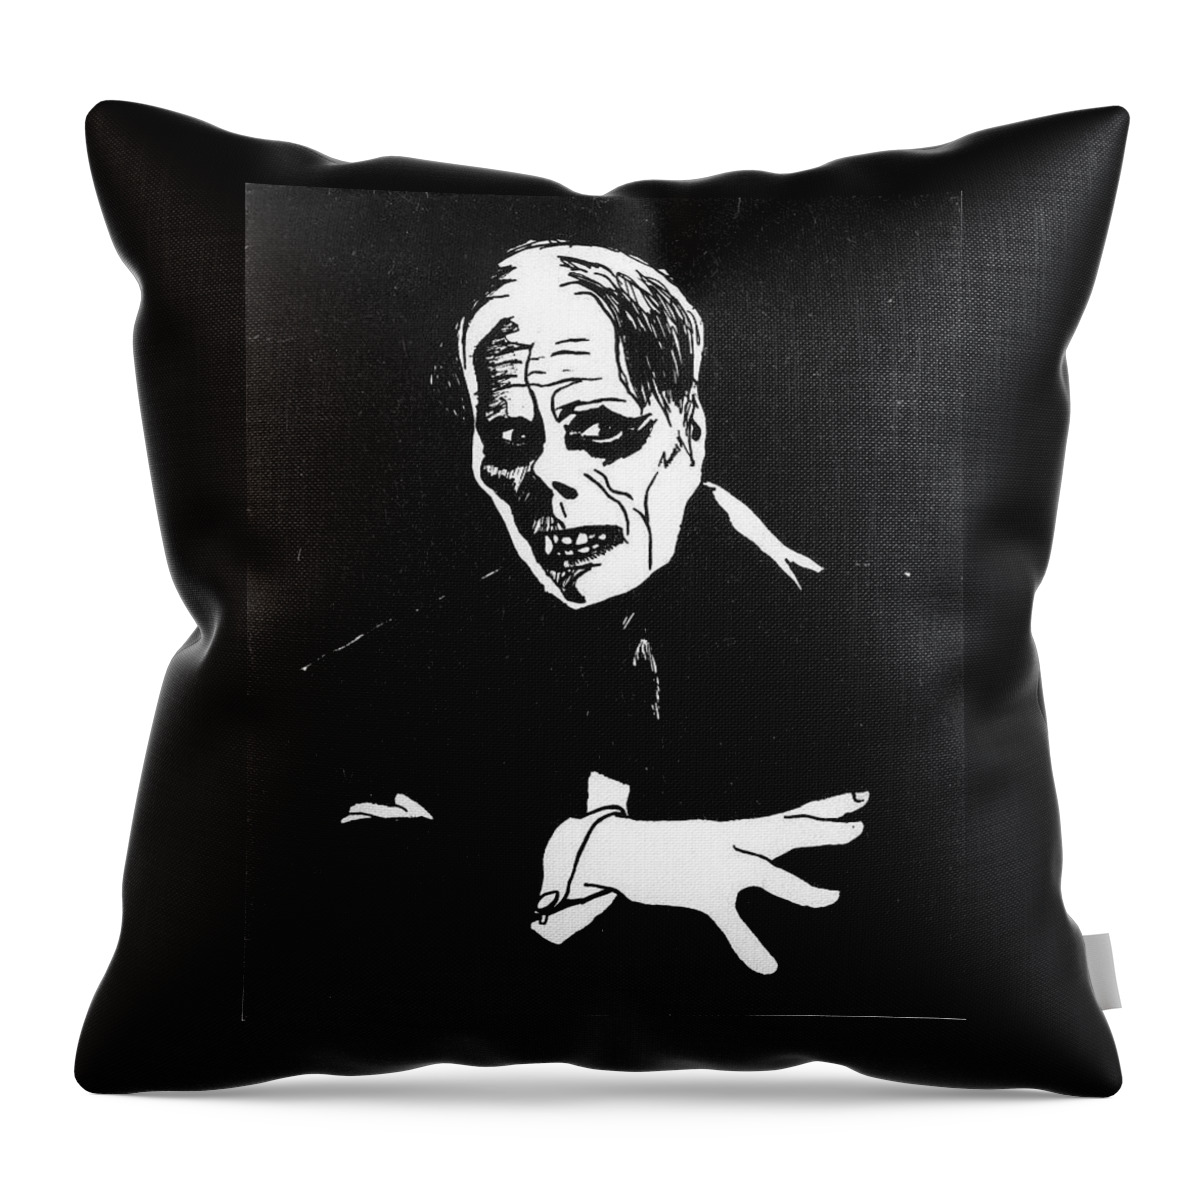 Portraits Throw Pillow featuring the drawing Lon Chaney as The Phantom by William Beyer